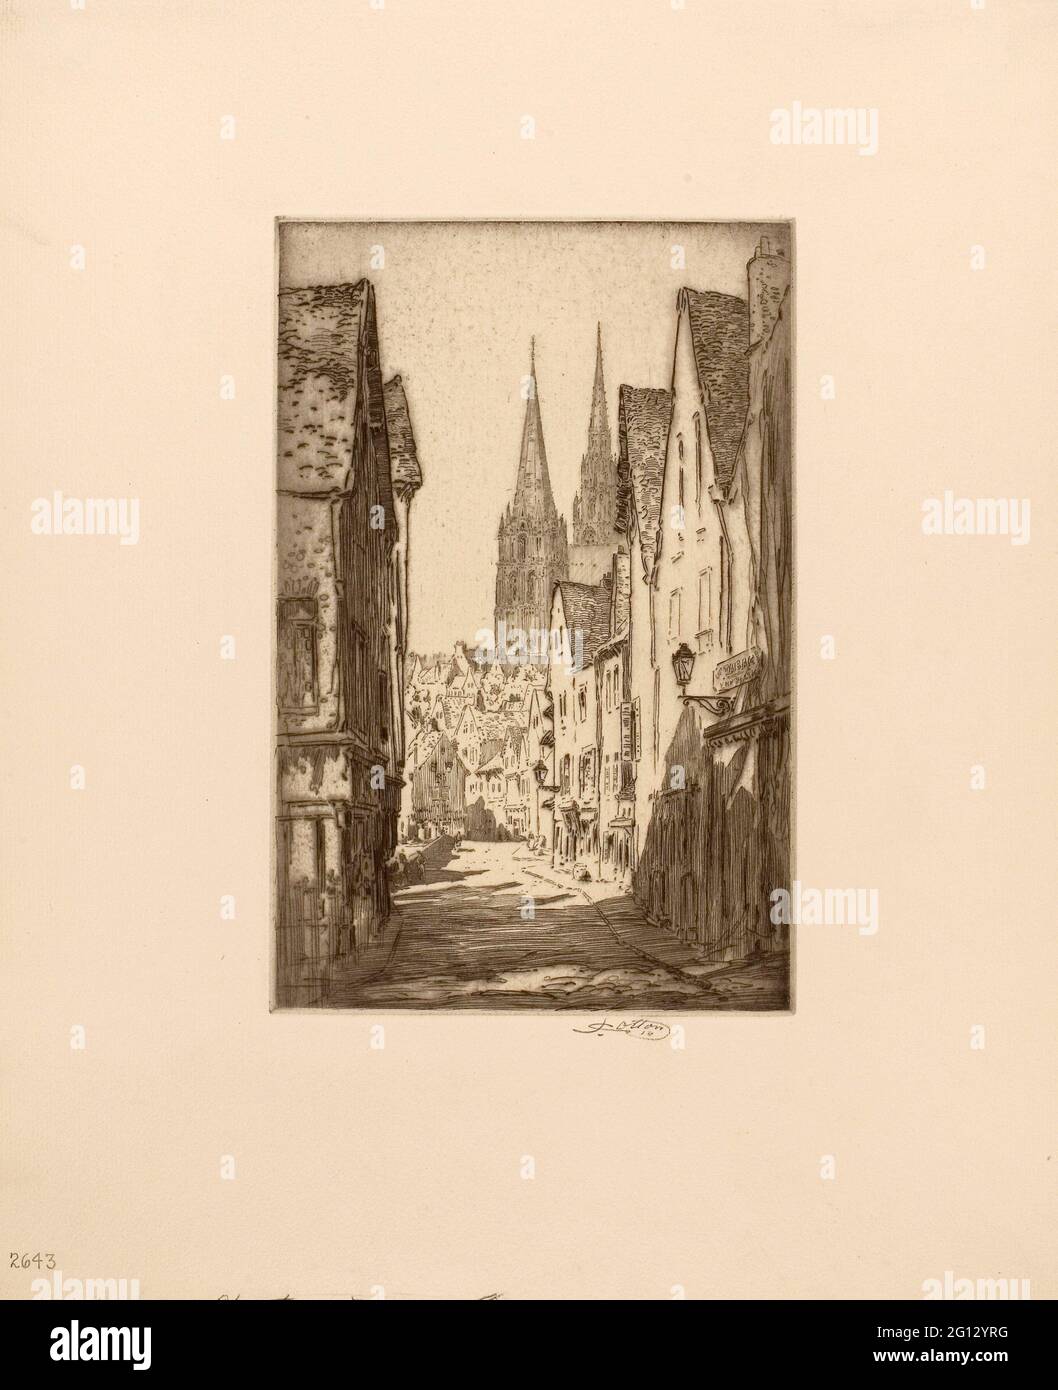 John Wesley Cotton. Street in Chartres - 1919 - John Wesley Cotton Canadian, 1868-1932. Etching in black on ivory laid paper. Canada. Stock Photo